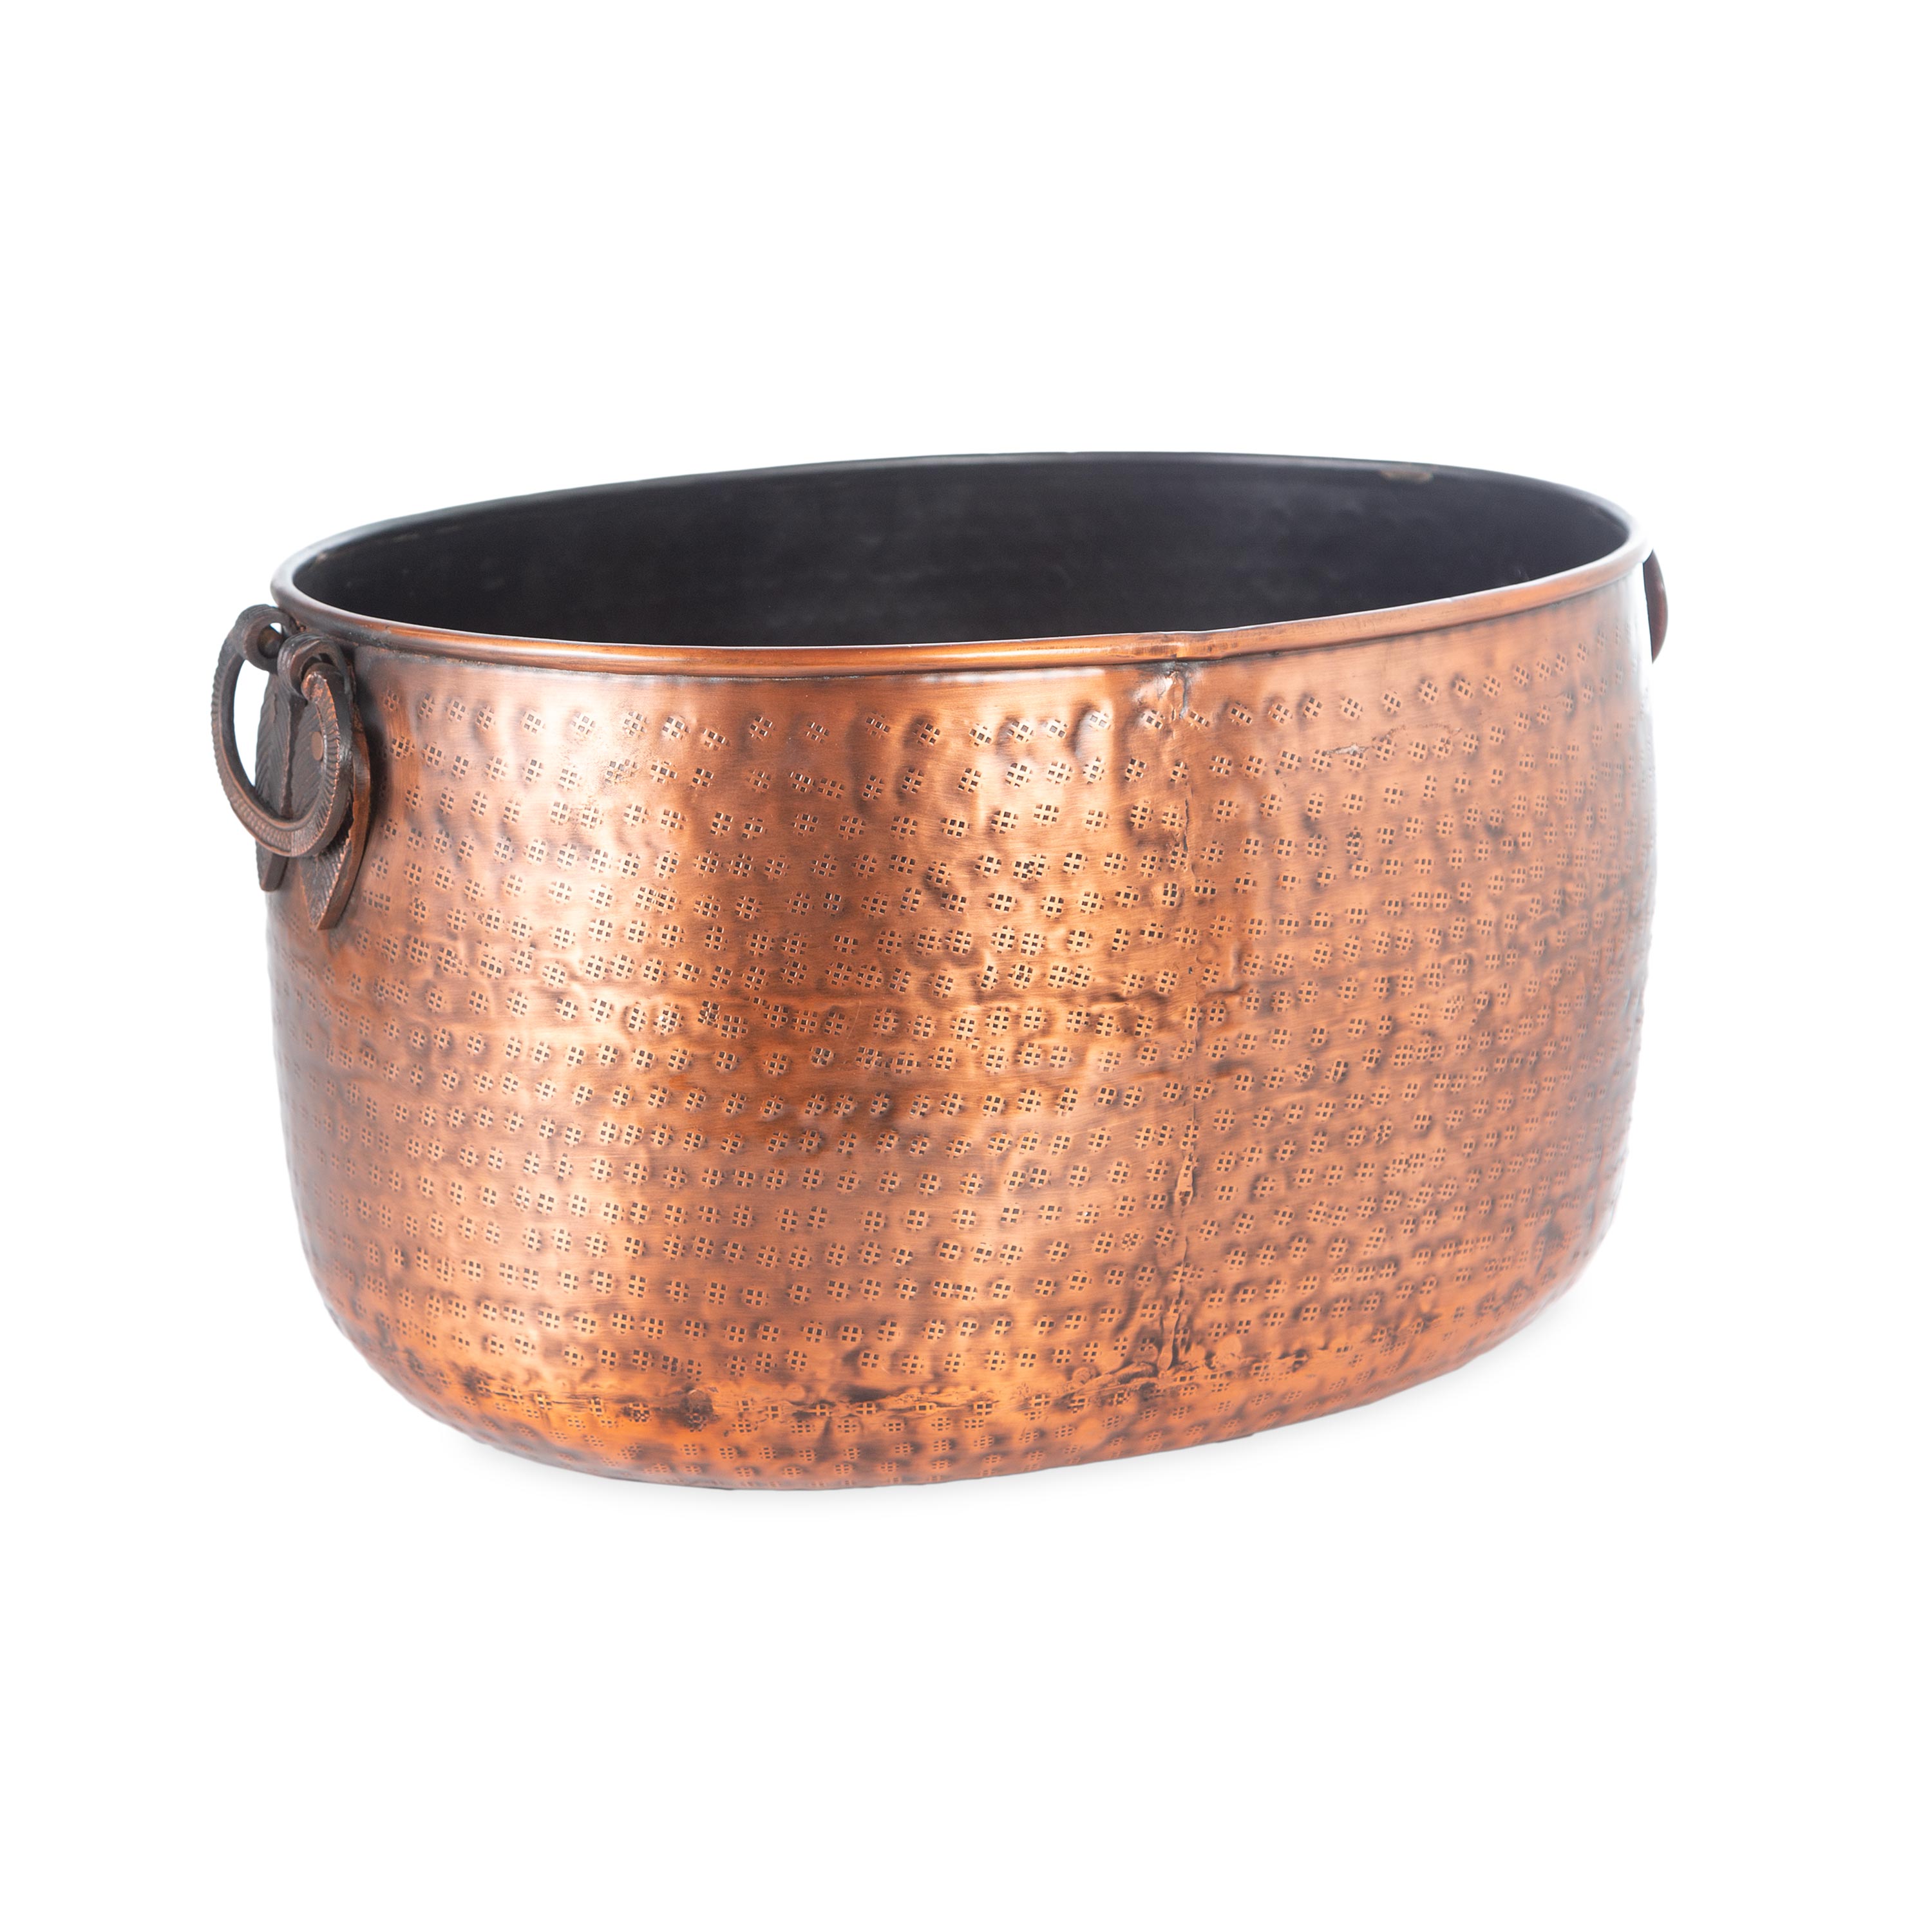 Copper-Finished Hammered Metal Firewood Buckets with Leaf Handles